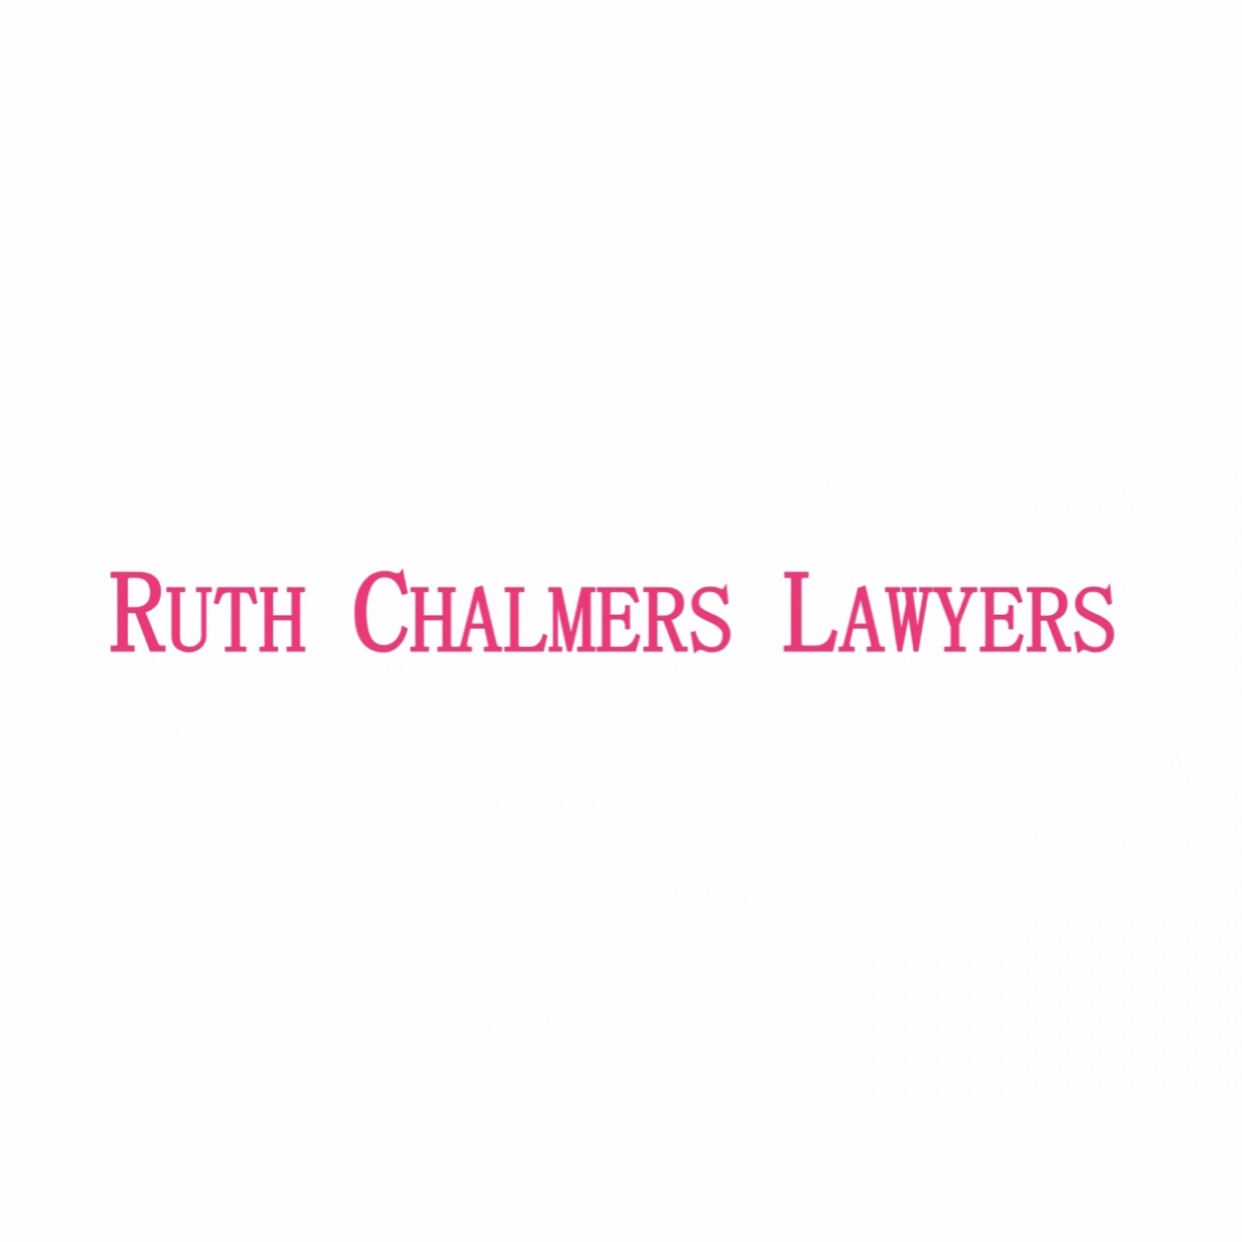 Ruth Chalmers Lawyers